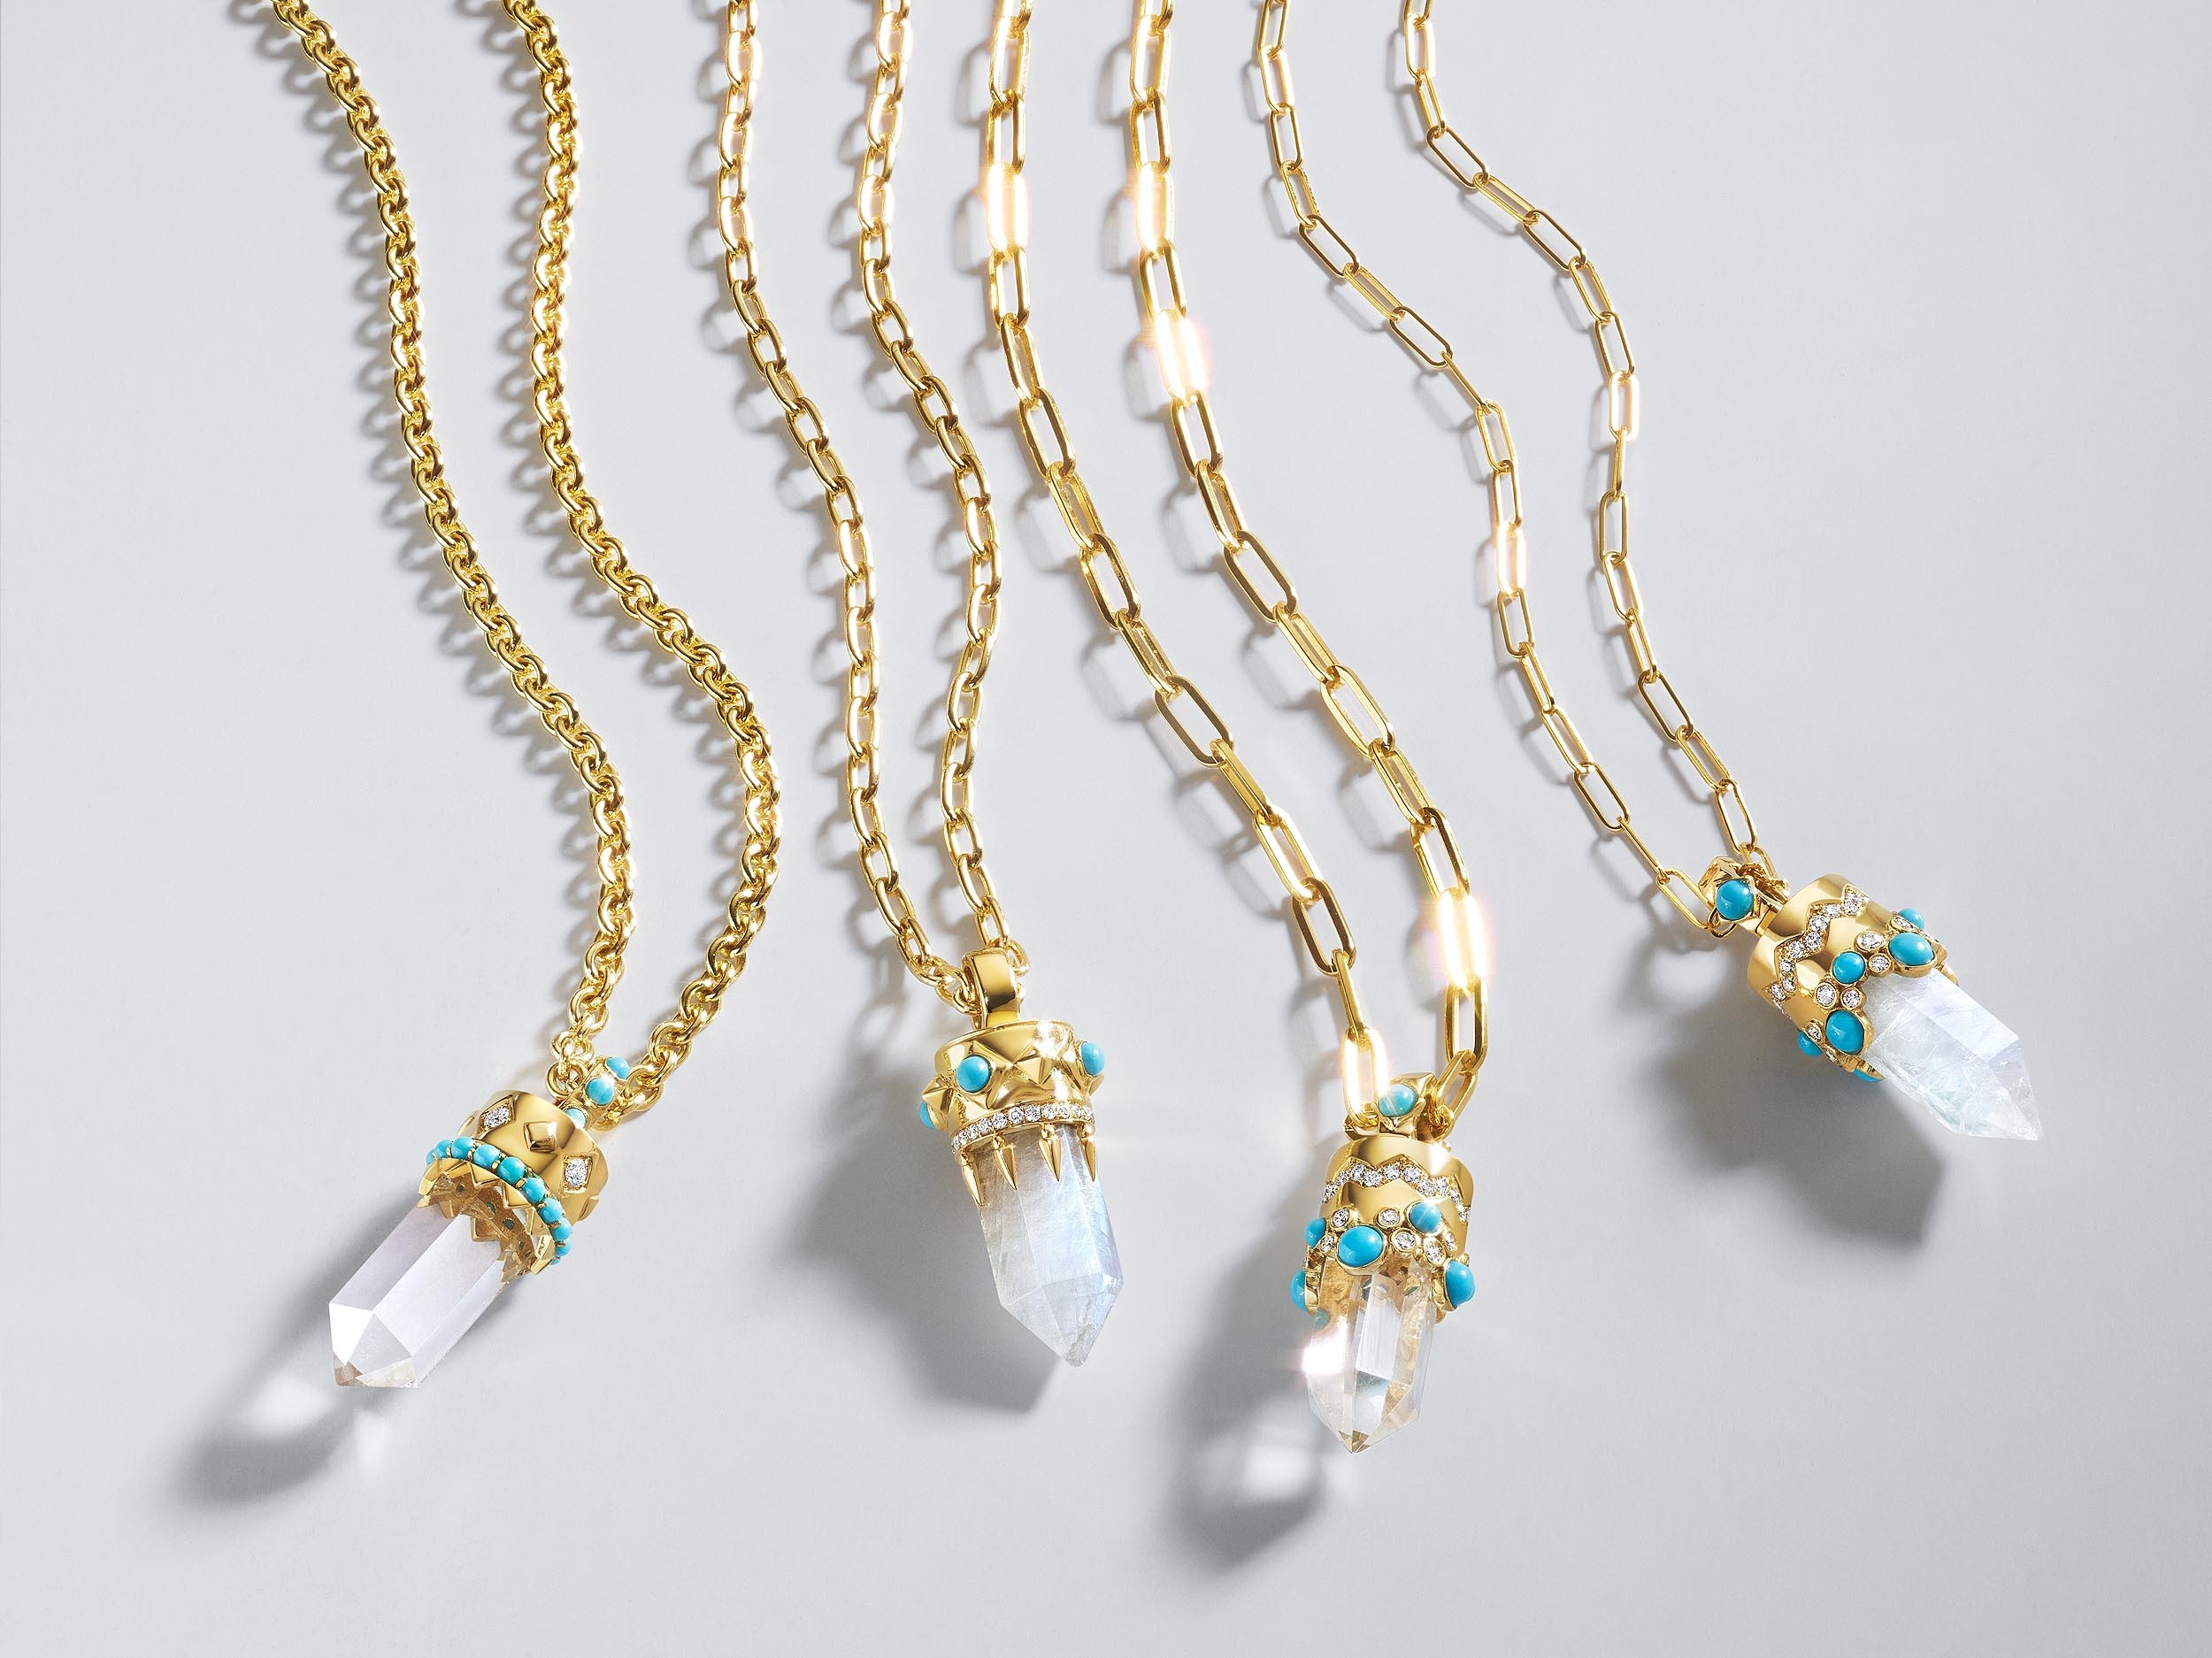 Karina Brez Introduces Crystal Pendants to the Cowgirl LUV Collection 299